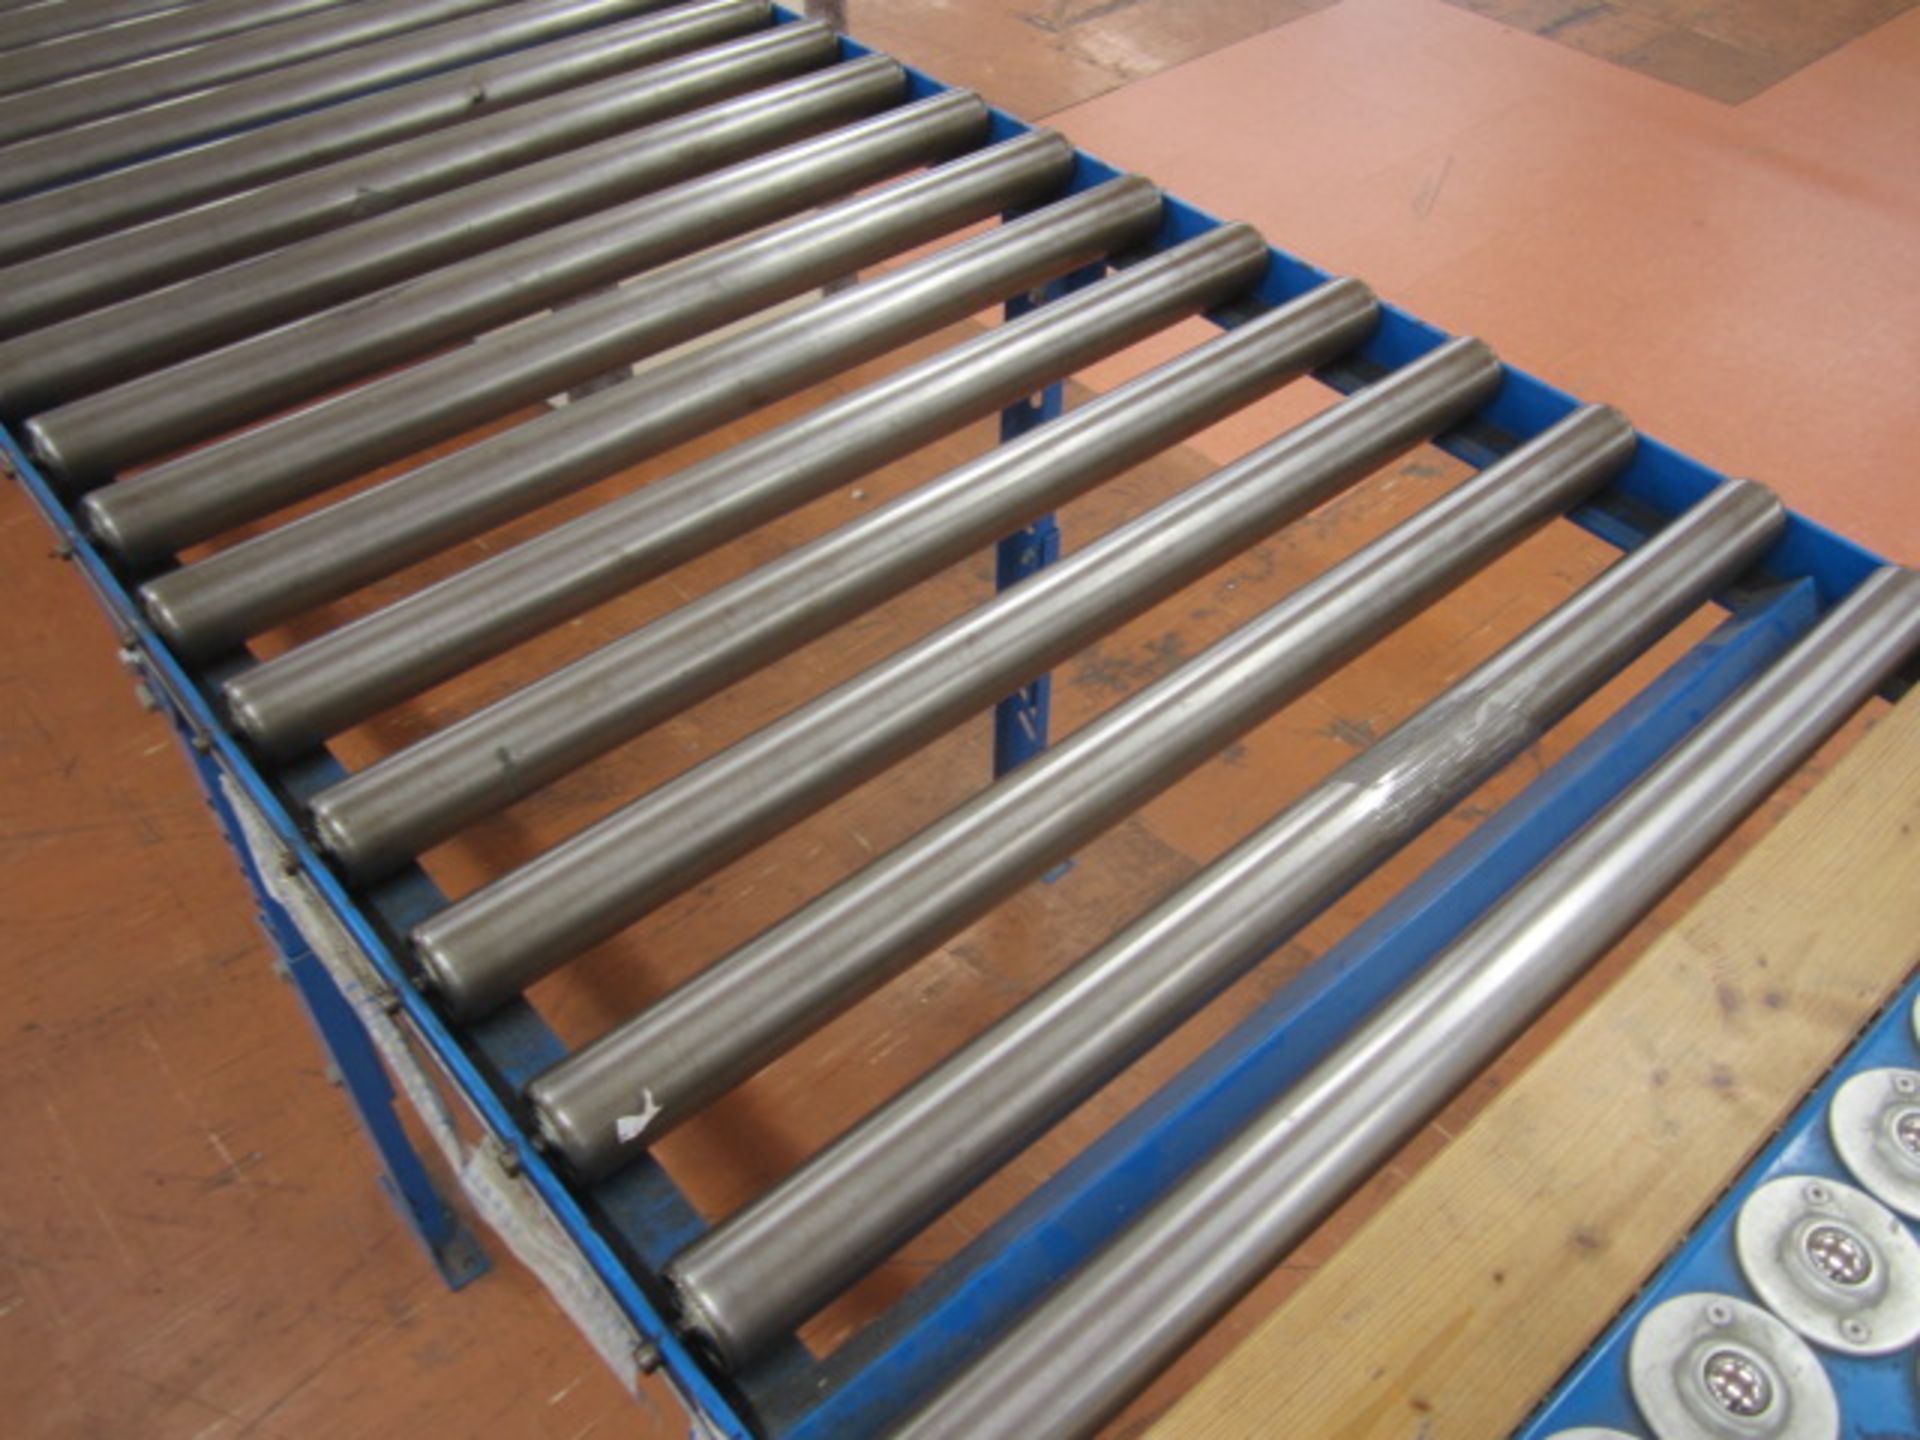 Dowell gravity roller conveyor with roller ball section, approx. size: 790mm x 6.4m. - Lift out - Image 3 of 6